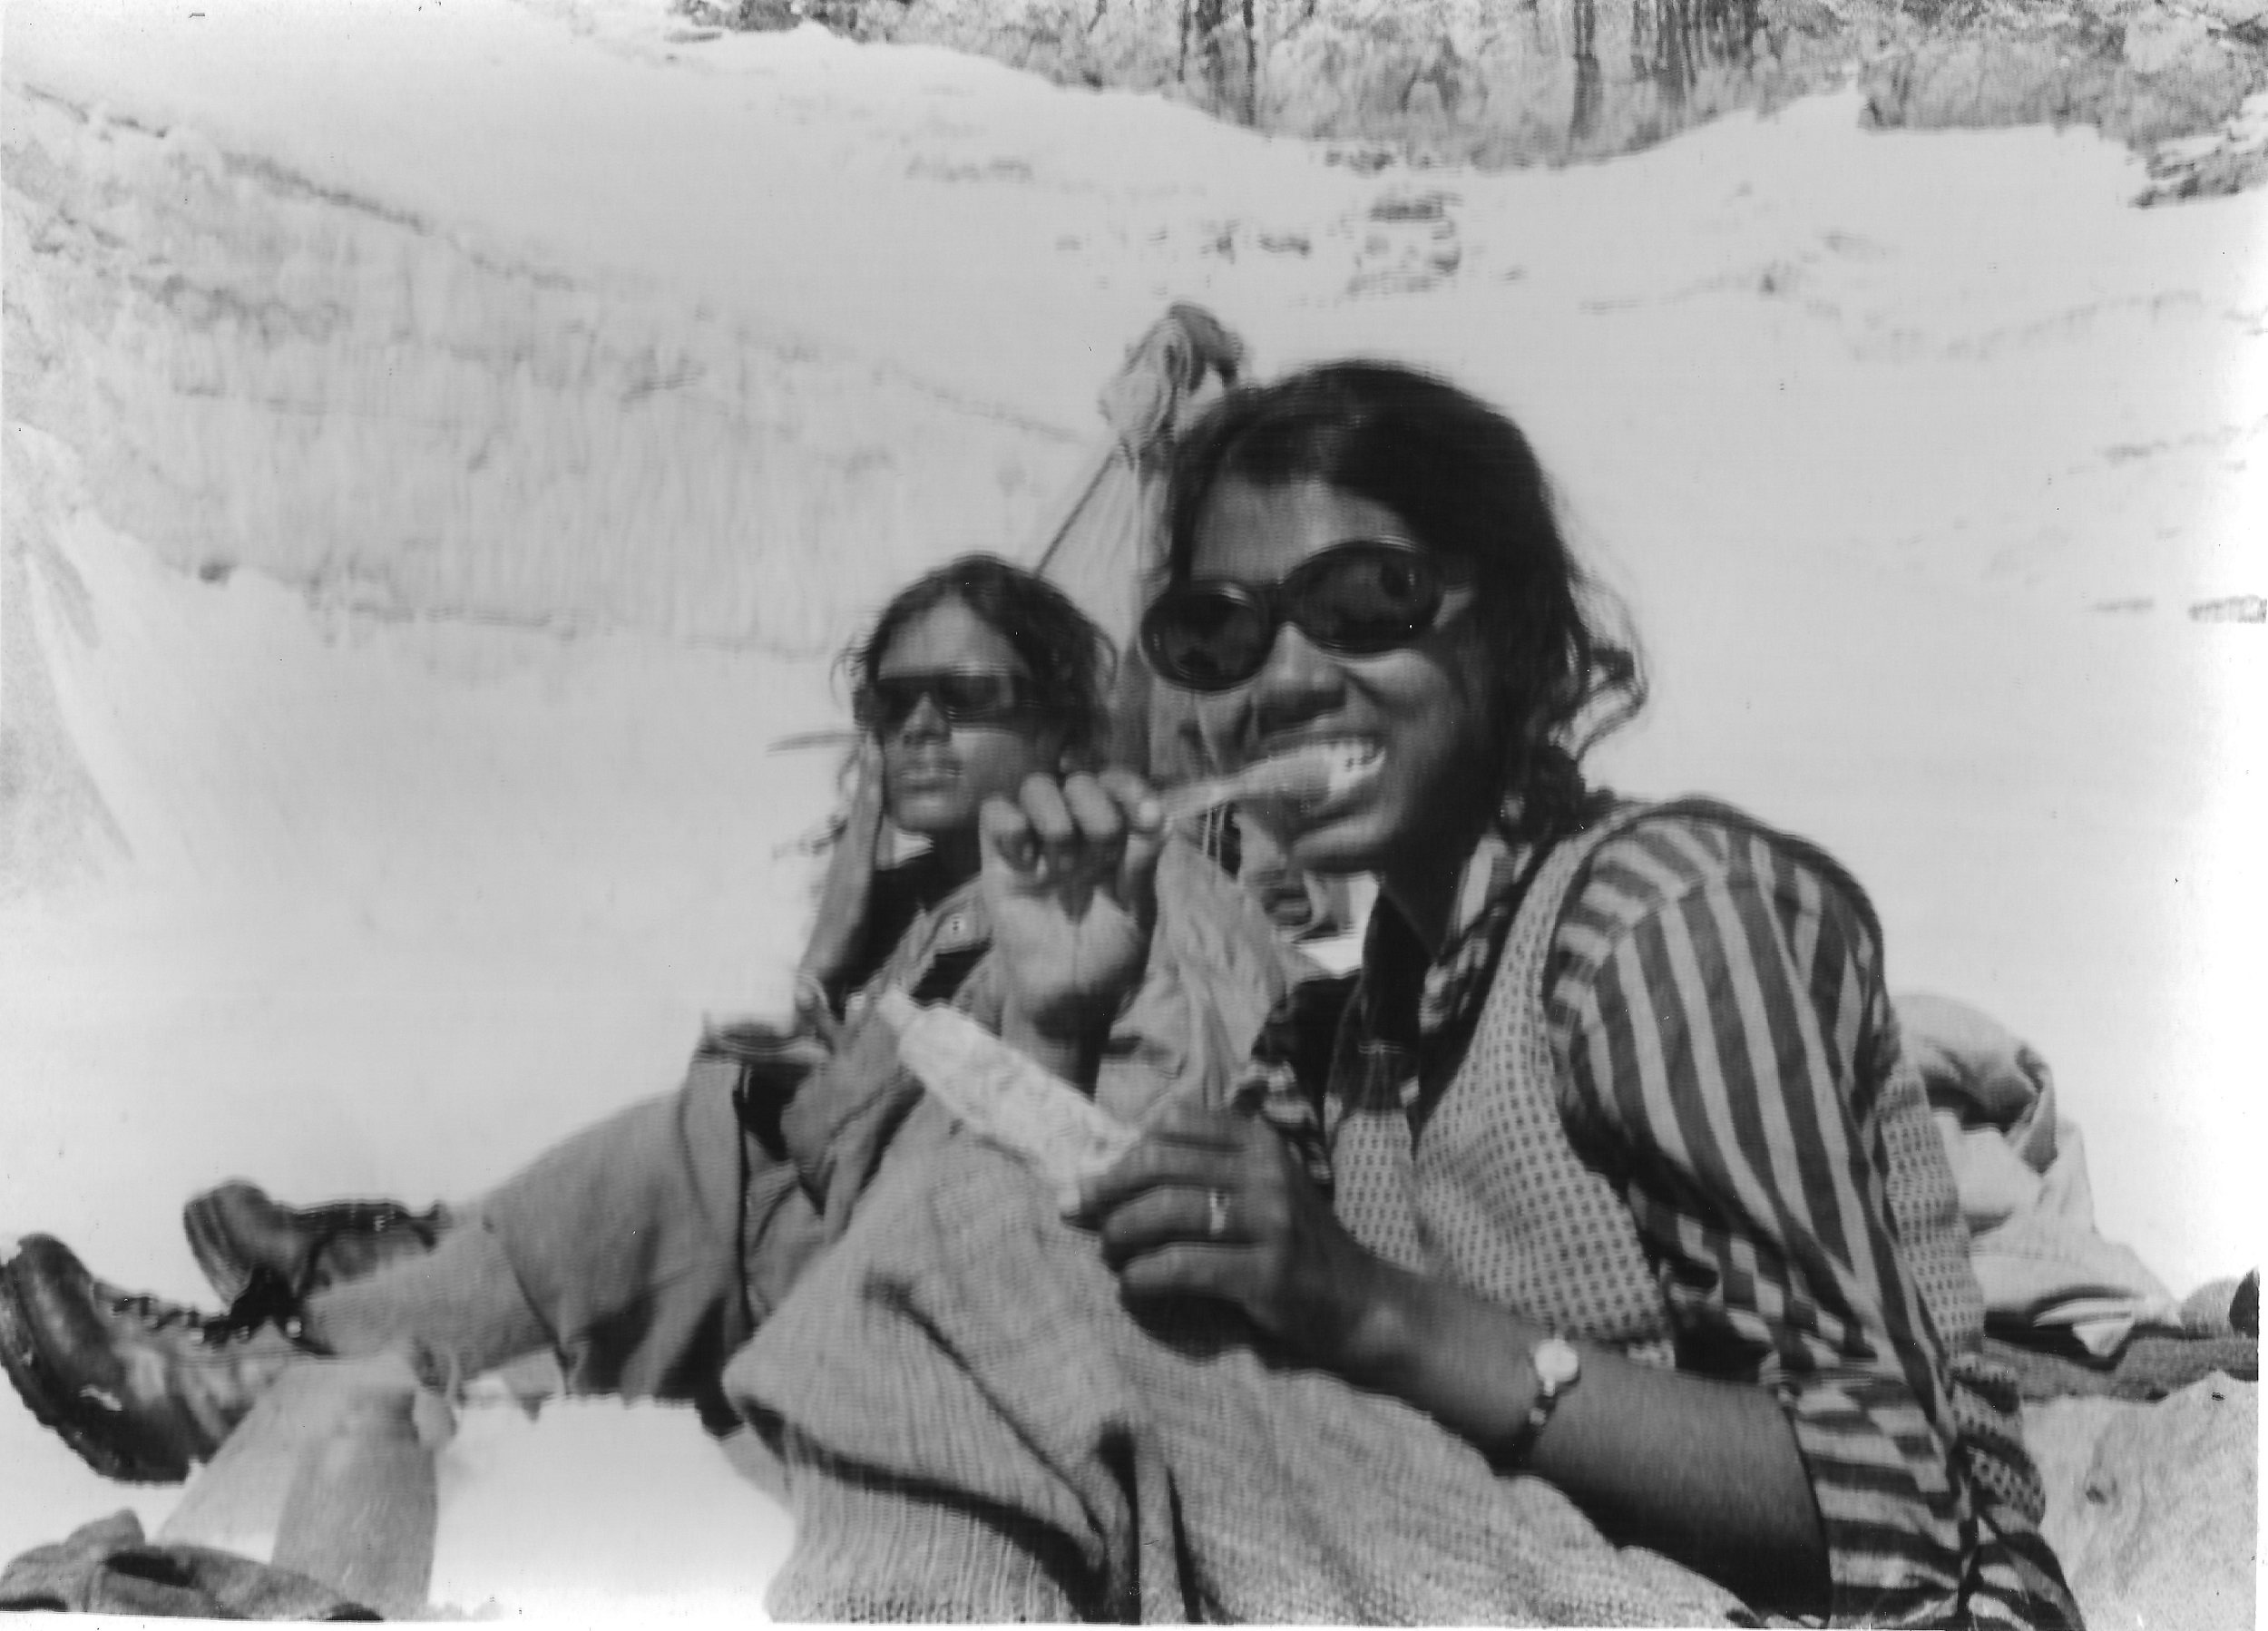 <p>The expedition to climb Lalana was an adventure that none of the people on it would forget; Sudipta (right) and Kamala [image by: Sudipta Sengupta]</p>